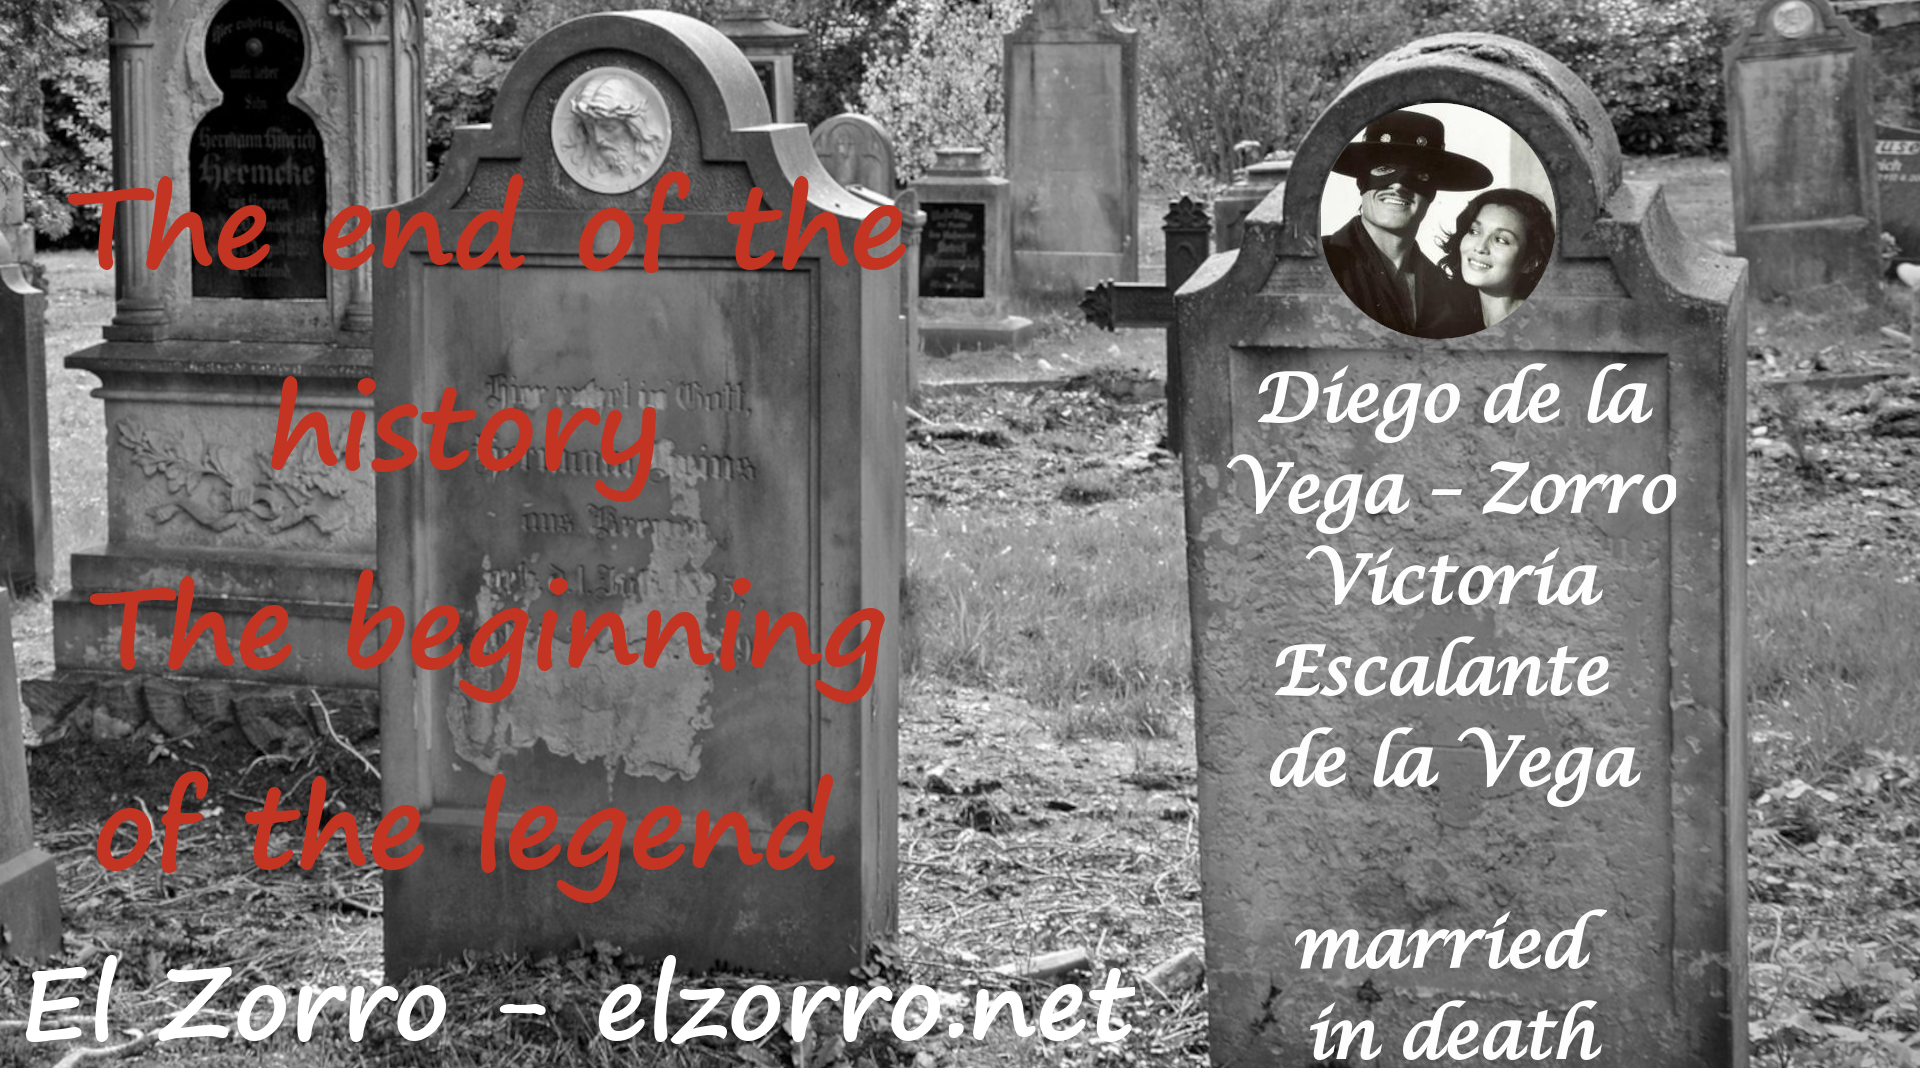 Zorro fiction - The end of the history The beginning of the legend